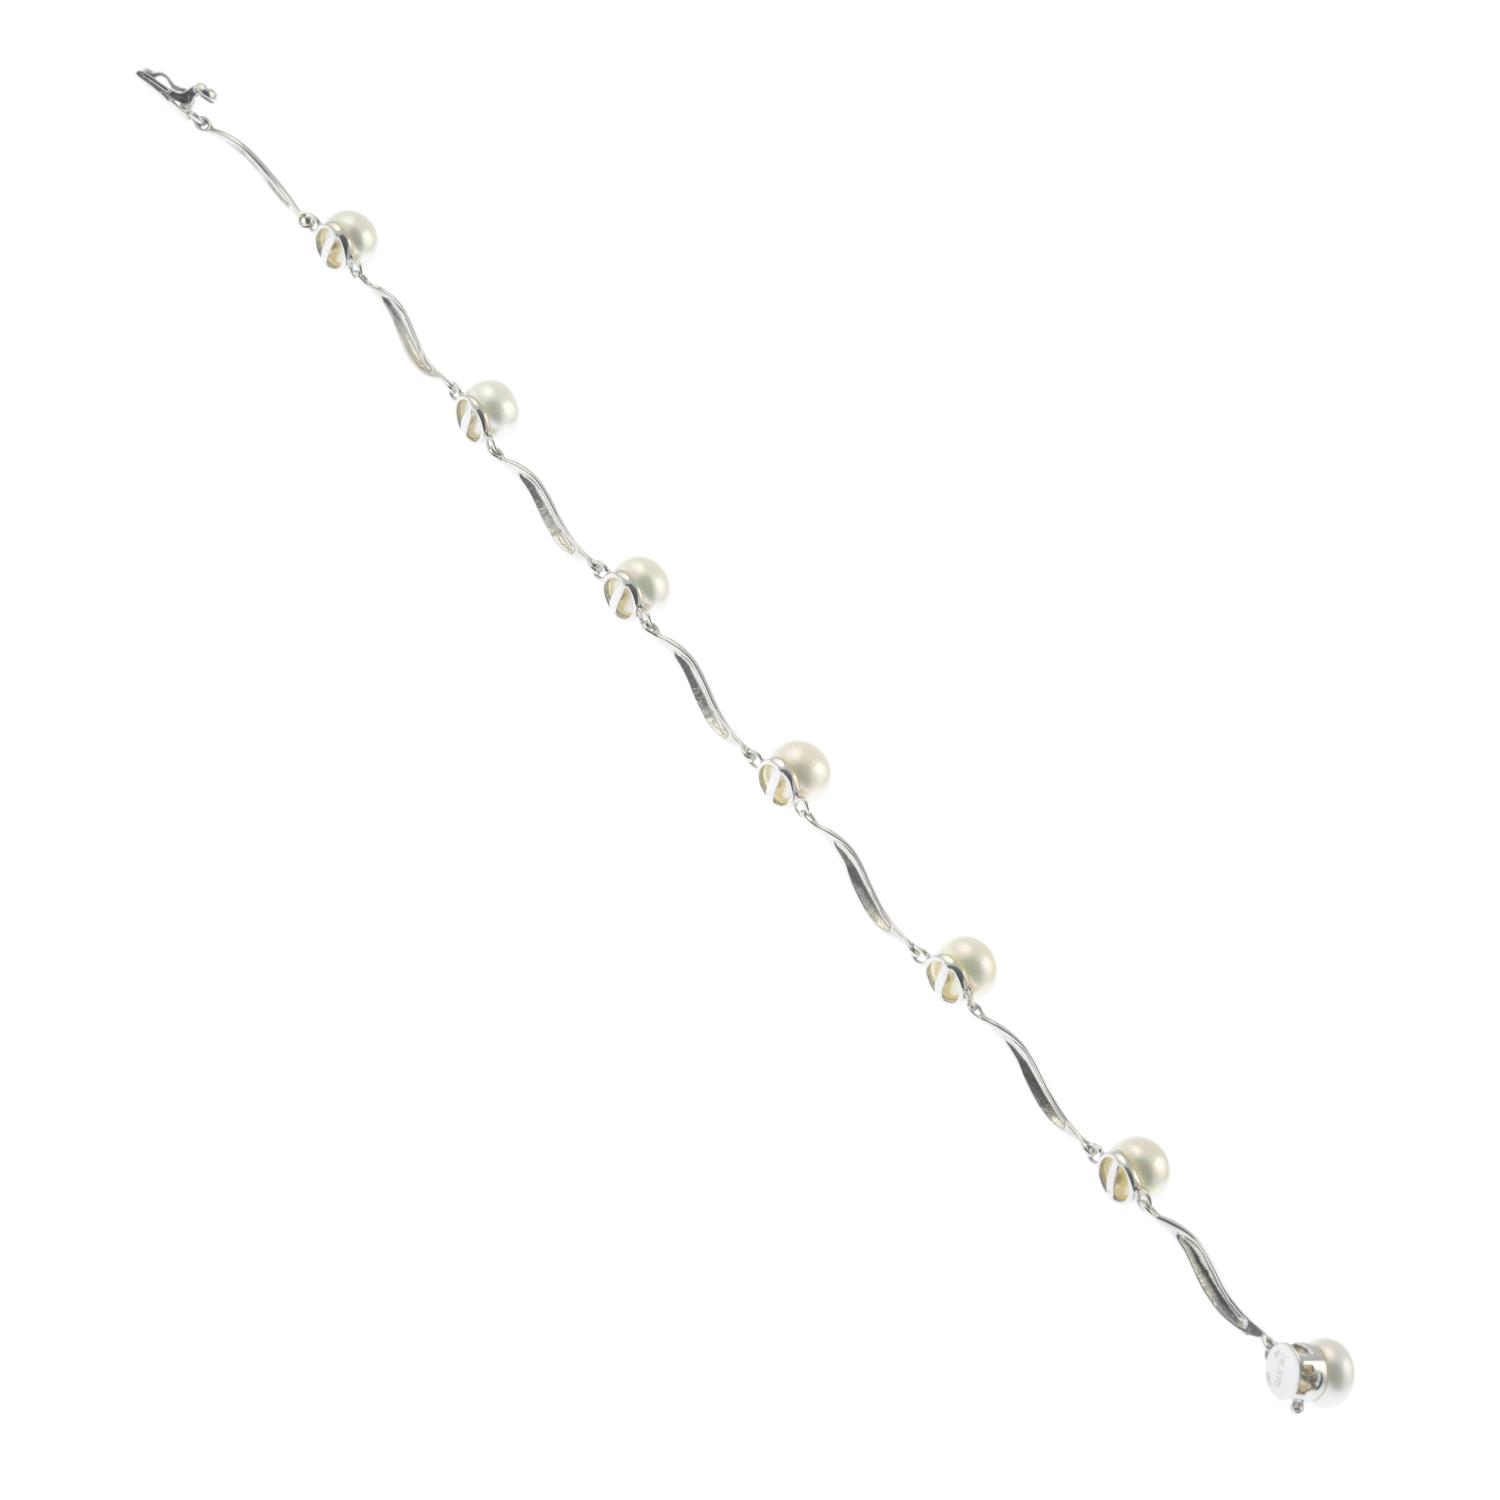 A 9ct gold cultured pearl bracelet.Hallmarks for London.Diameter of one cultured pearl 7.5mms. - Image 3 of 3